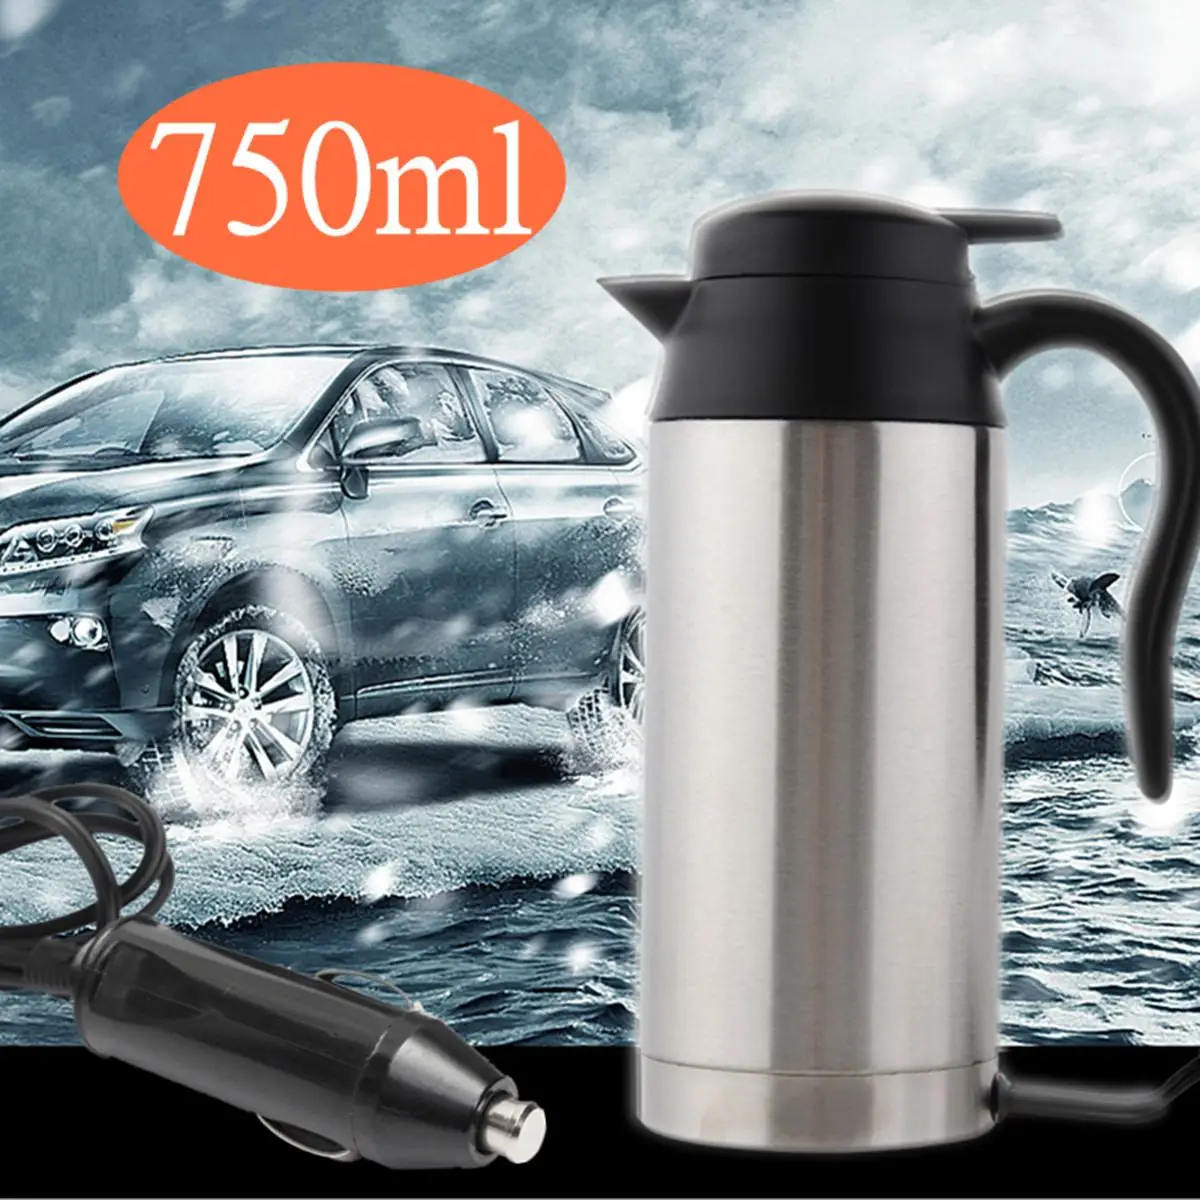 

Car Based Heating Travel 750ml 12V Thermoses Stainless Steel Cup Kettle Coffee Tea Heated Mug Motor Hot Water For Car Truck Use